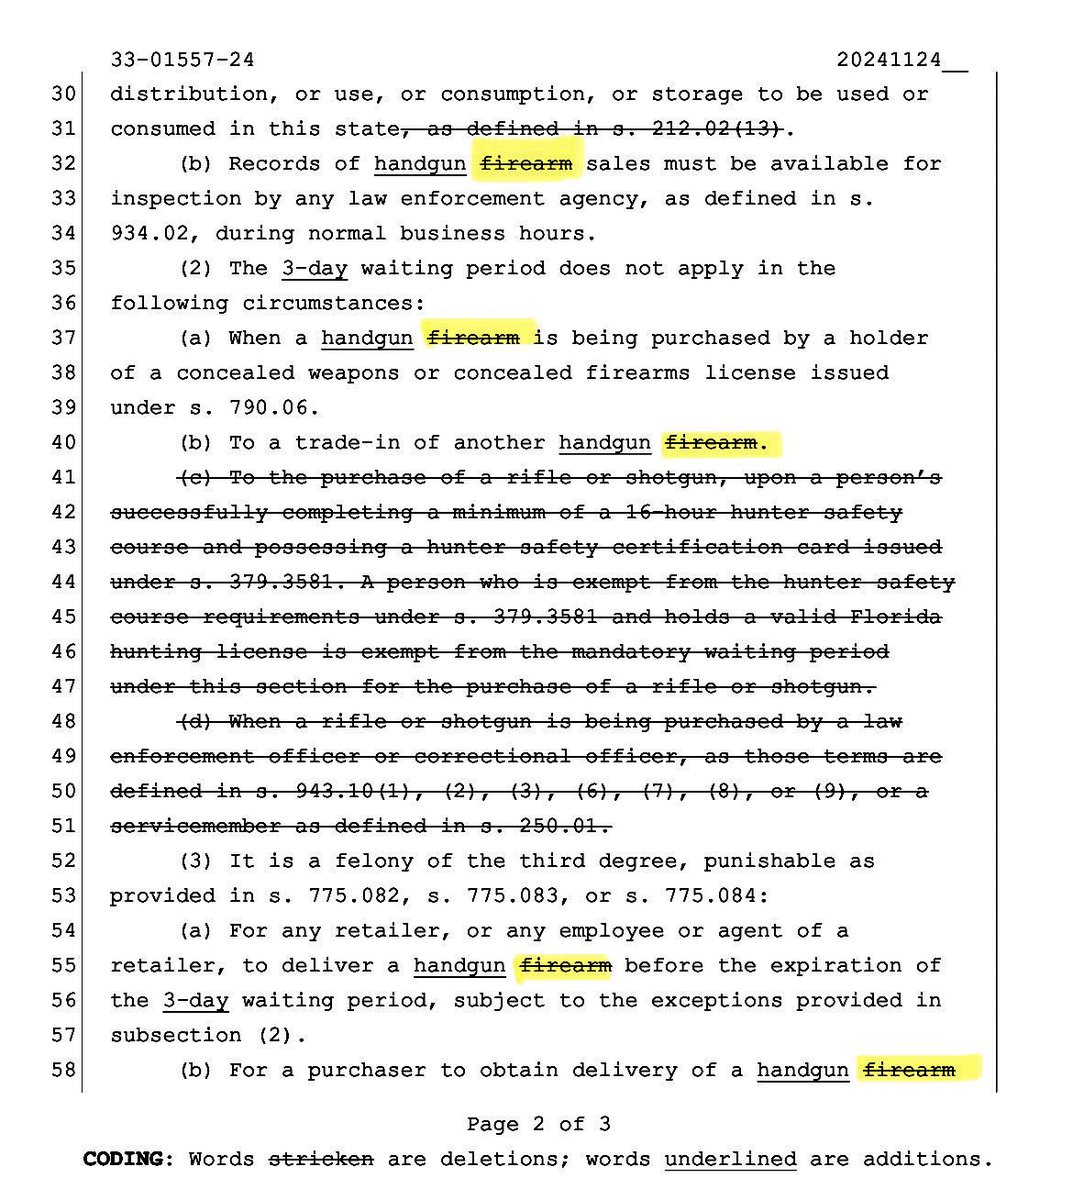 A Florida GOP Senator just filed HB 1124 completely eliminating our 3-day waiting period to buy AR-15s. Loosening access to the same weapons of war used to kill 49 people at Pulse nightclub + 17 people in Parkland is as dangerous as it is disgraceful. Have we learned nothing?